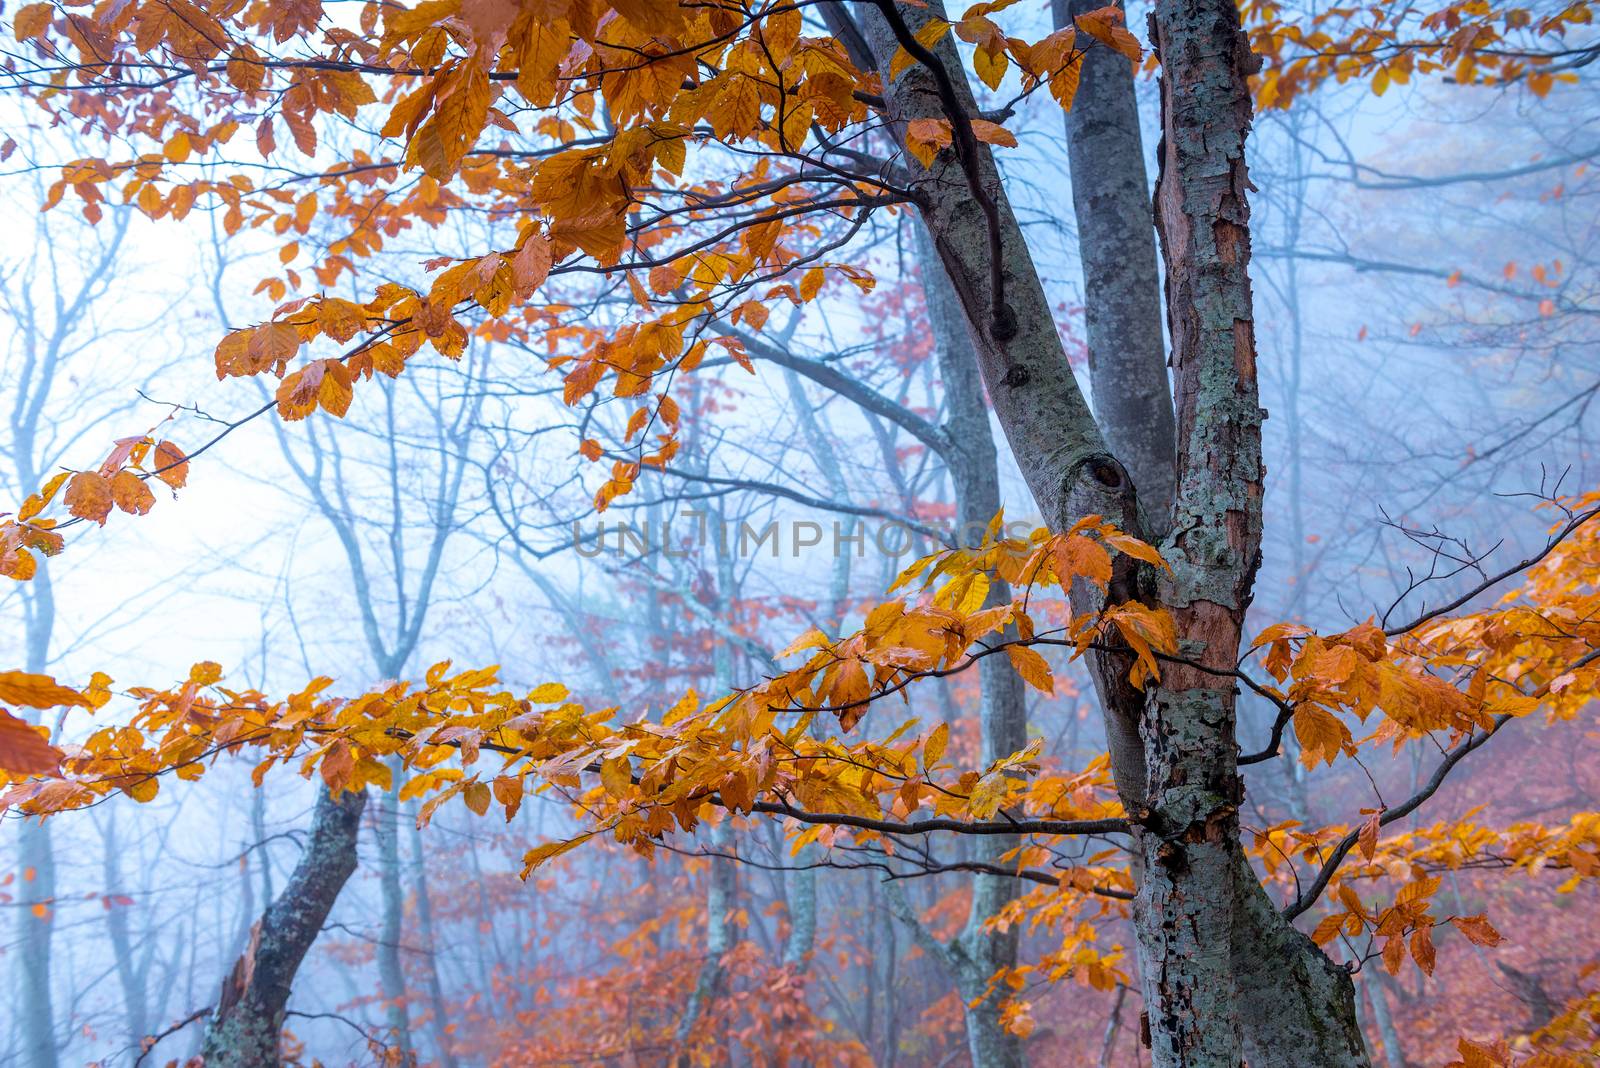 Trees with yellow leaves in the autumn forest in the mountains d by kosmsos111